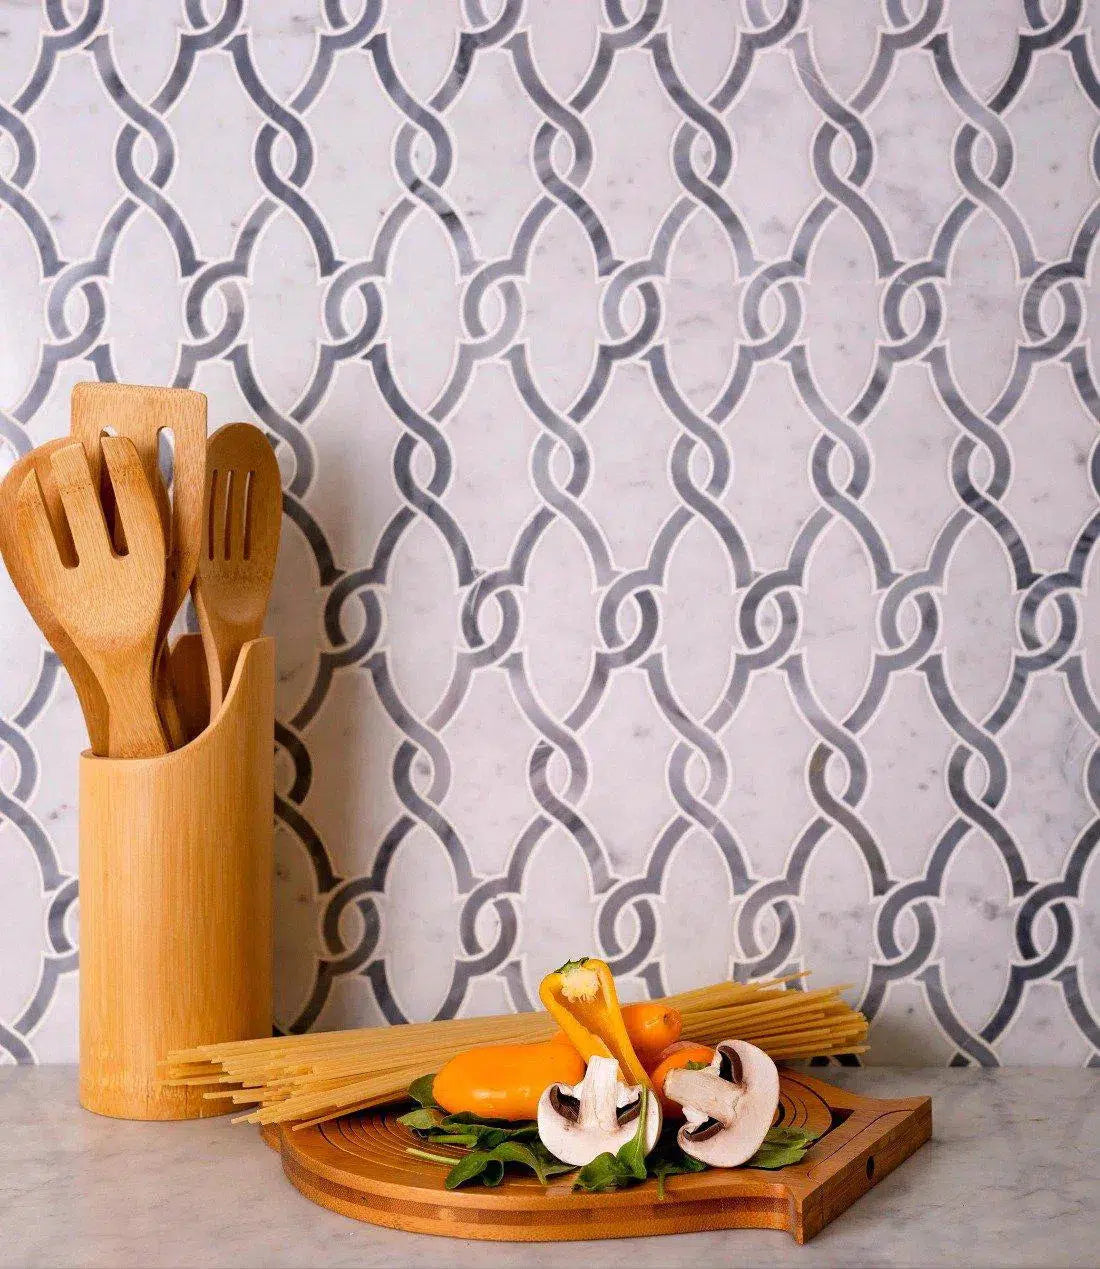 Bardiglio Chains Marble Mosaic Tile for a Patterned Kitchen Design